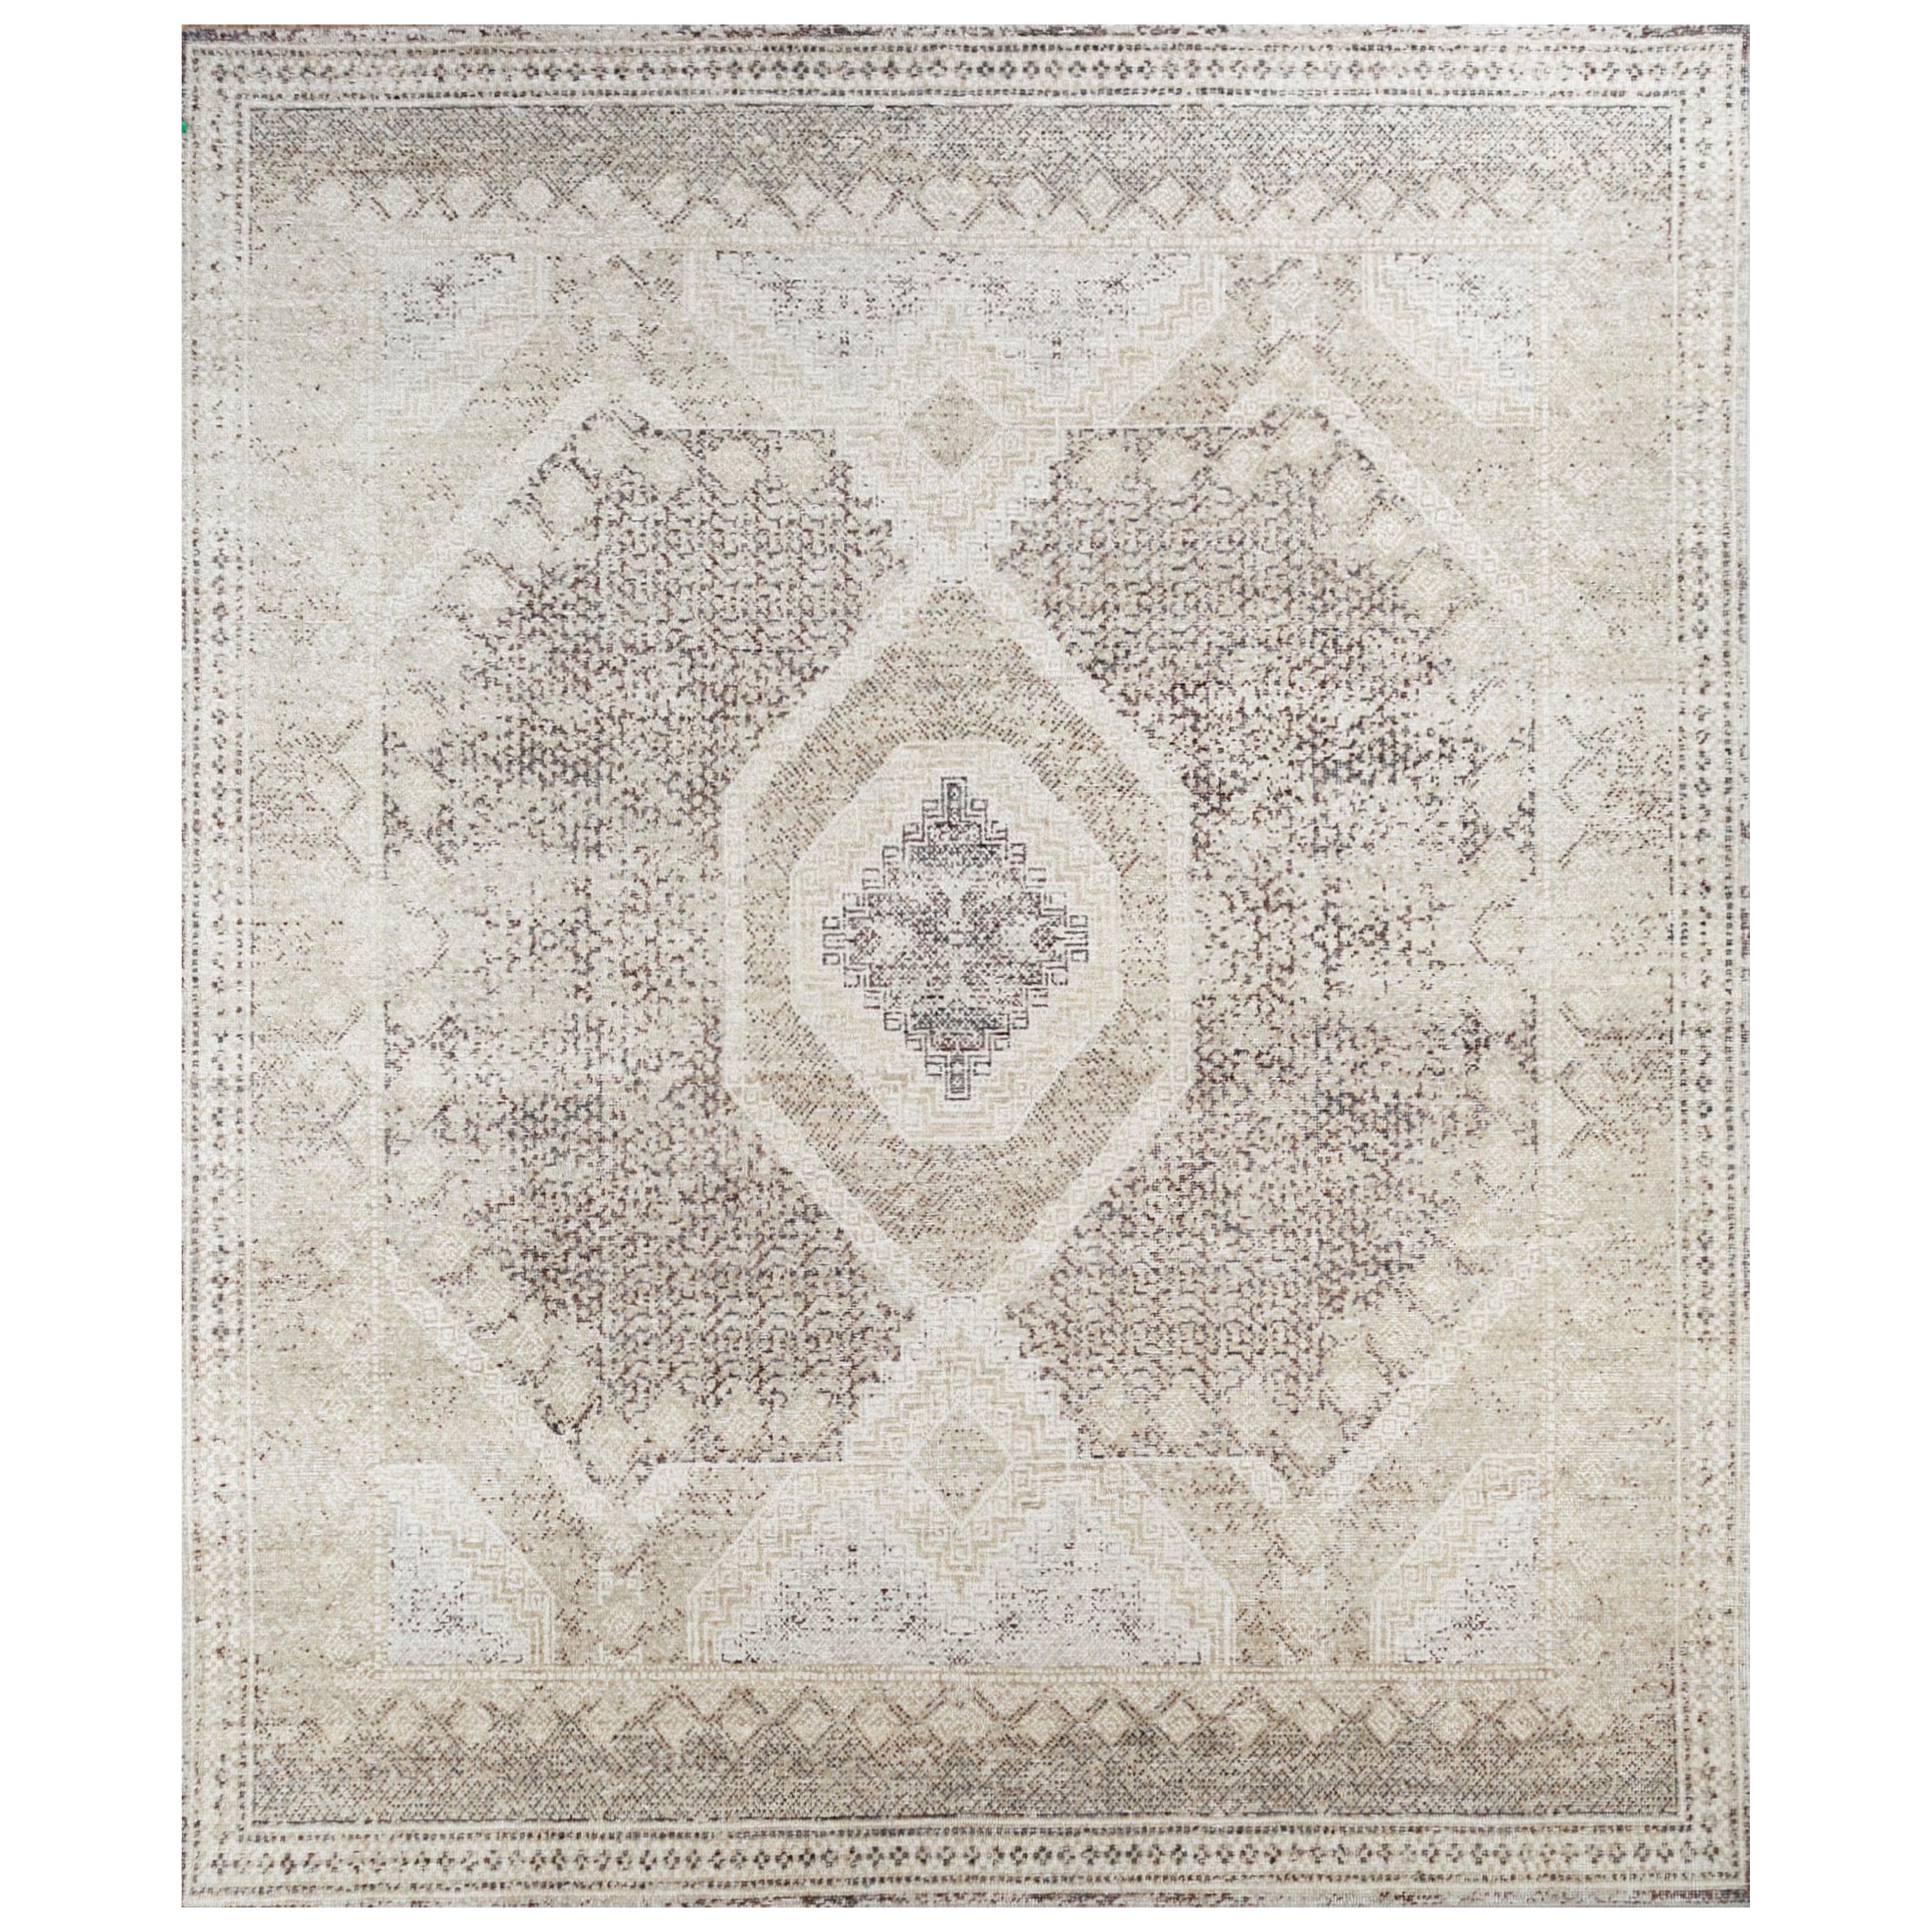 Earthen Heritage Soft Tan 180X270 cm Hand-Knotted Rug